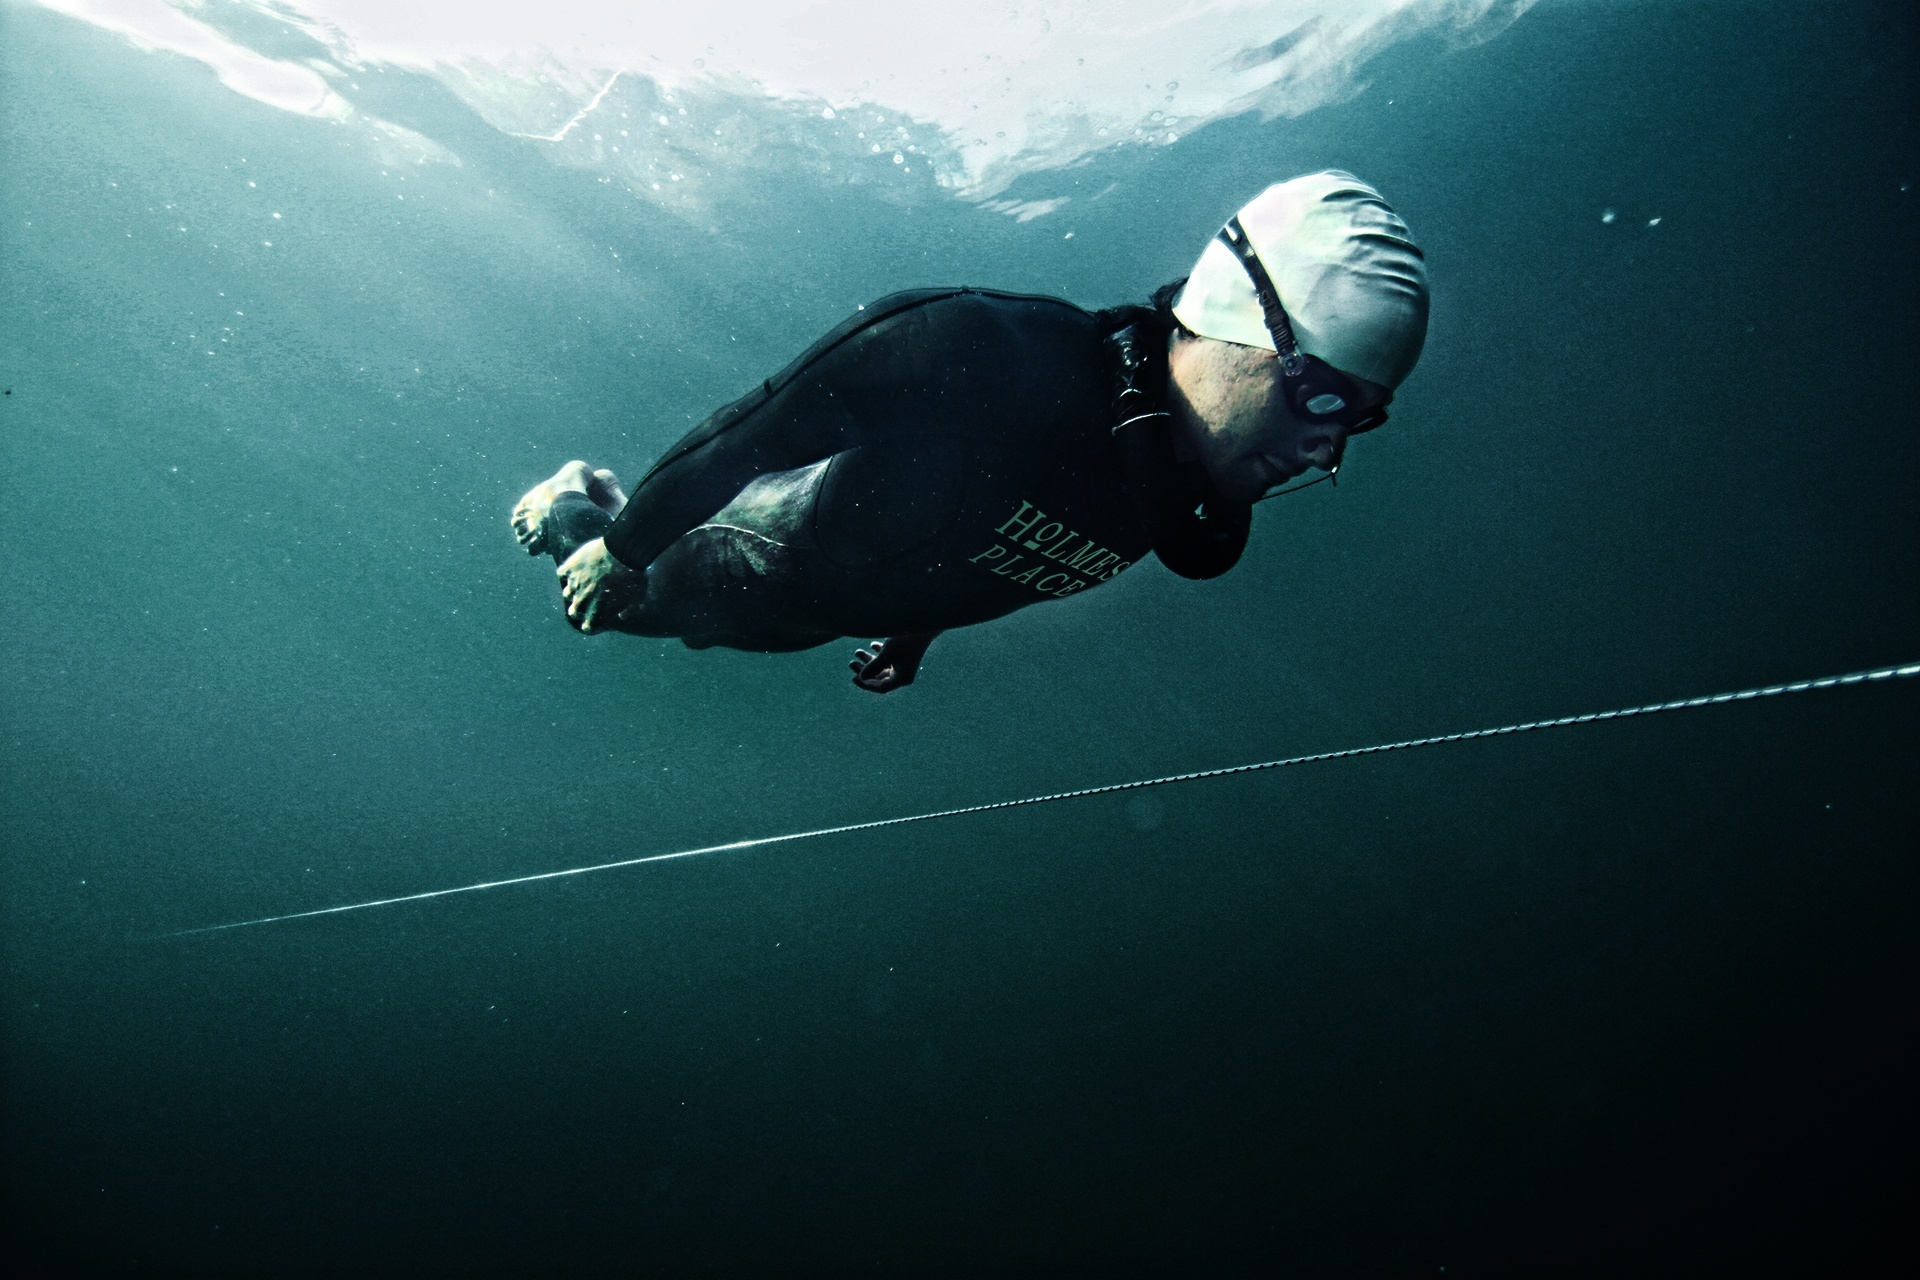 Freediving: A freediver during his underwater training session with a navigation rope. 1920x1280 HD Wallpaper.